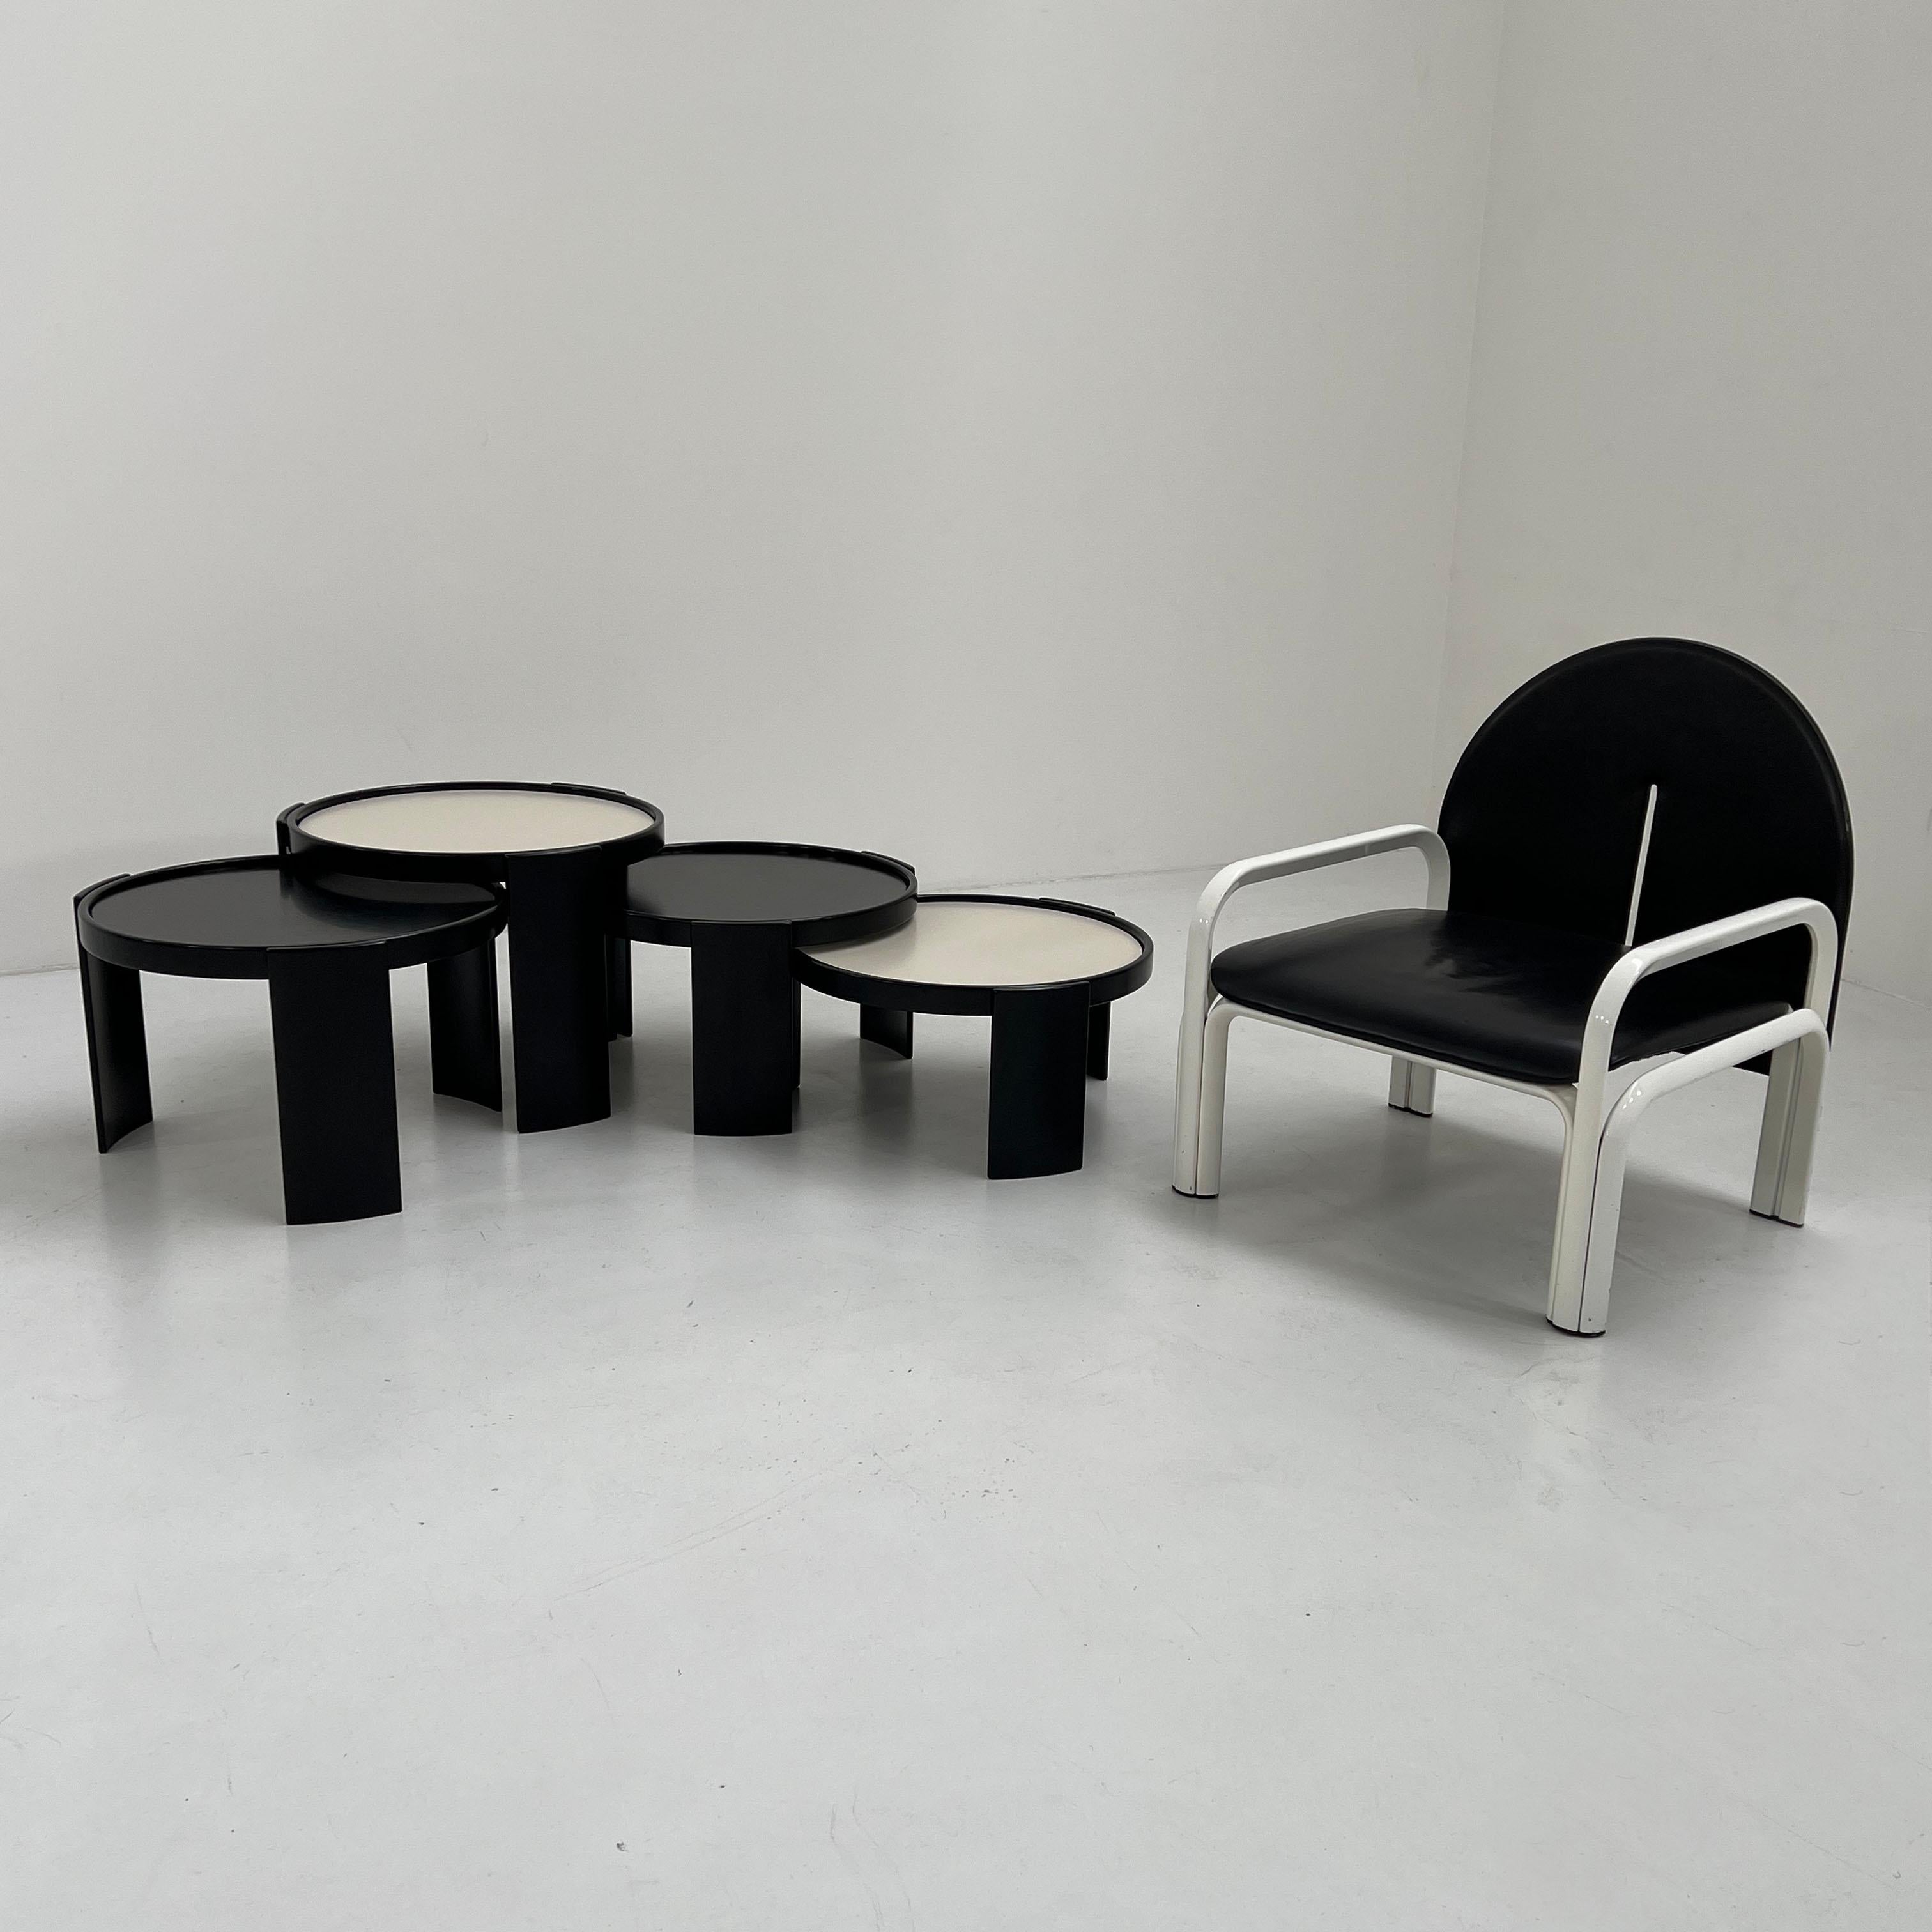 Laminate Set of Large Reversible Nesting Tables by Gianfranco Frattini for Cassina, 1960s For Sale